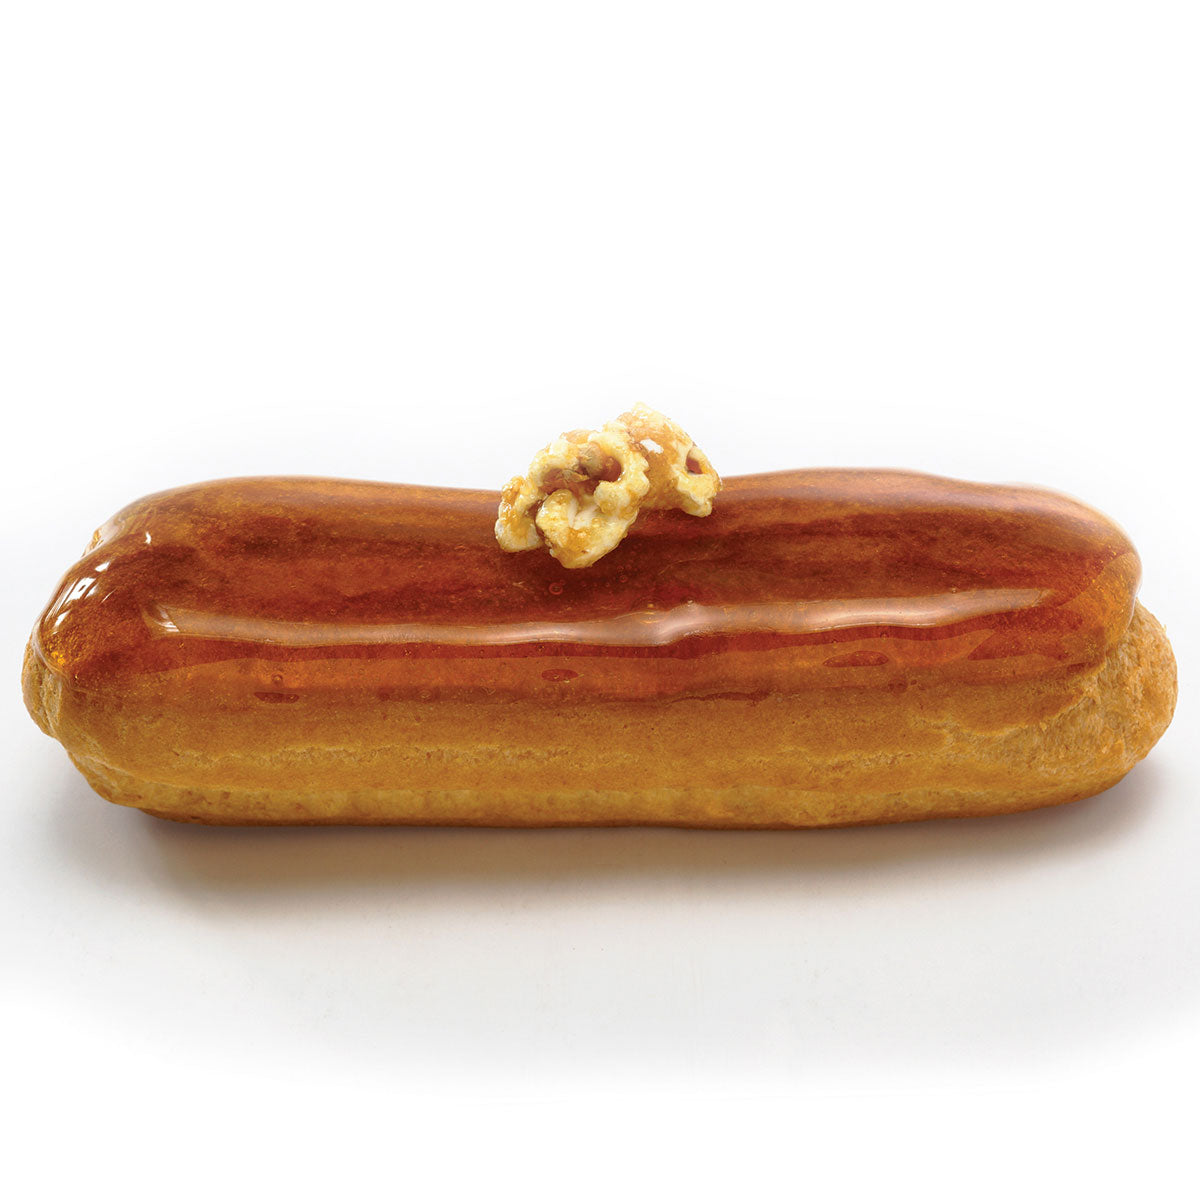 5" Eclair Shell dessert with caramel topping and decor